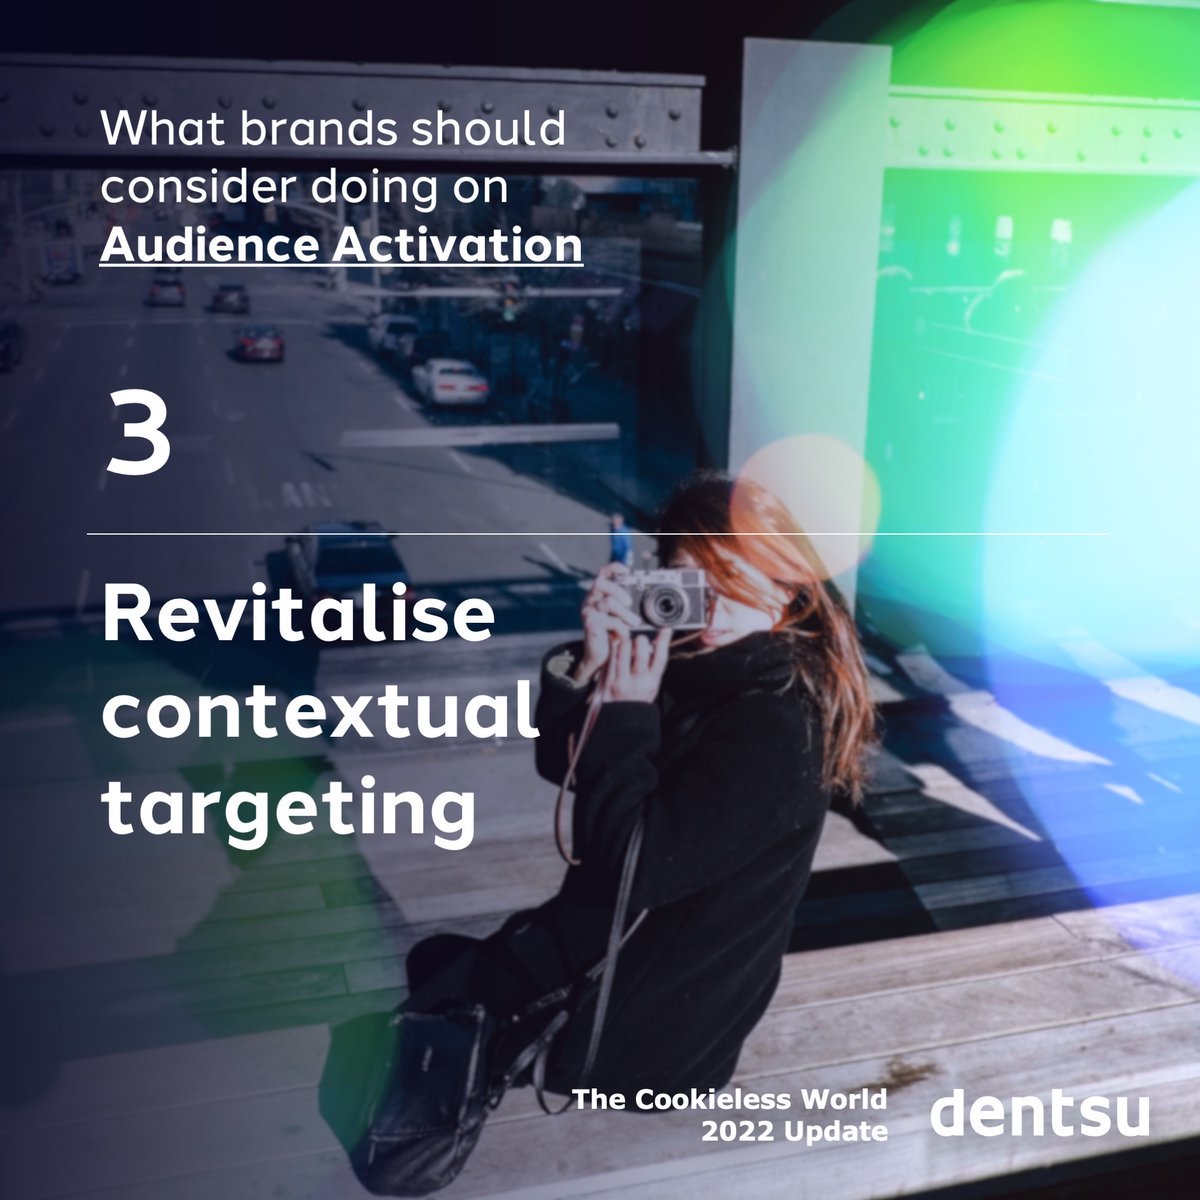 We've identified 3 considerations for #brands around #AudienceActivation in our newest report. Explore them now, along with other useful tips around #data management and performance measurement. fal.cn/3tdHT #digitaladvertising #advertising #cookieless #cookies